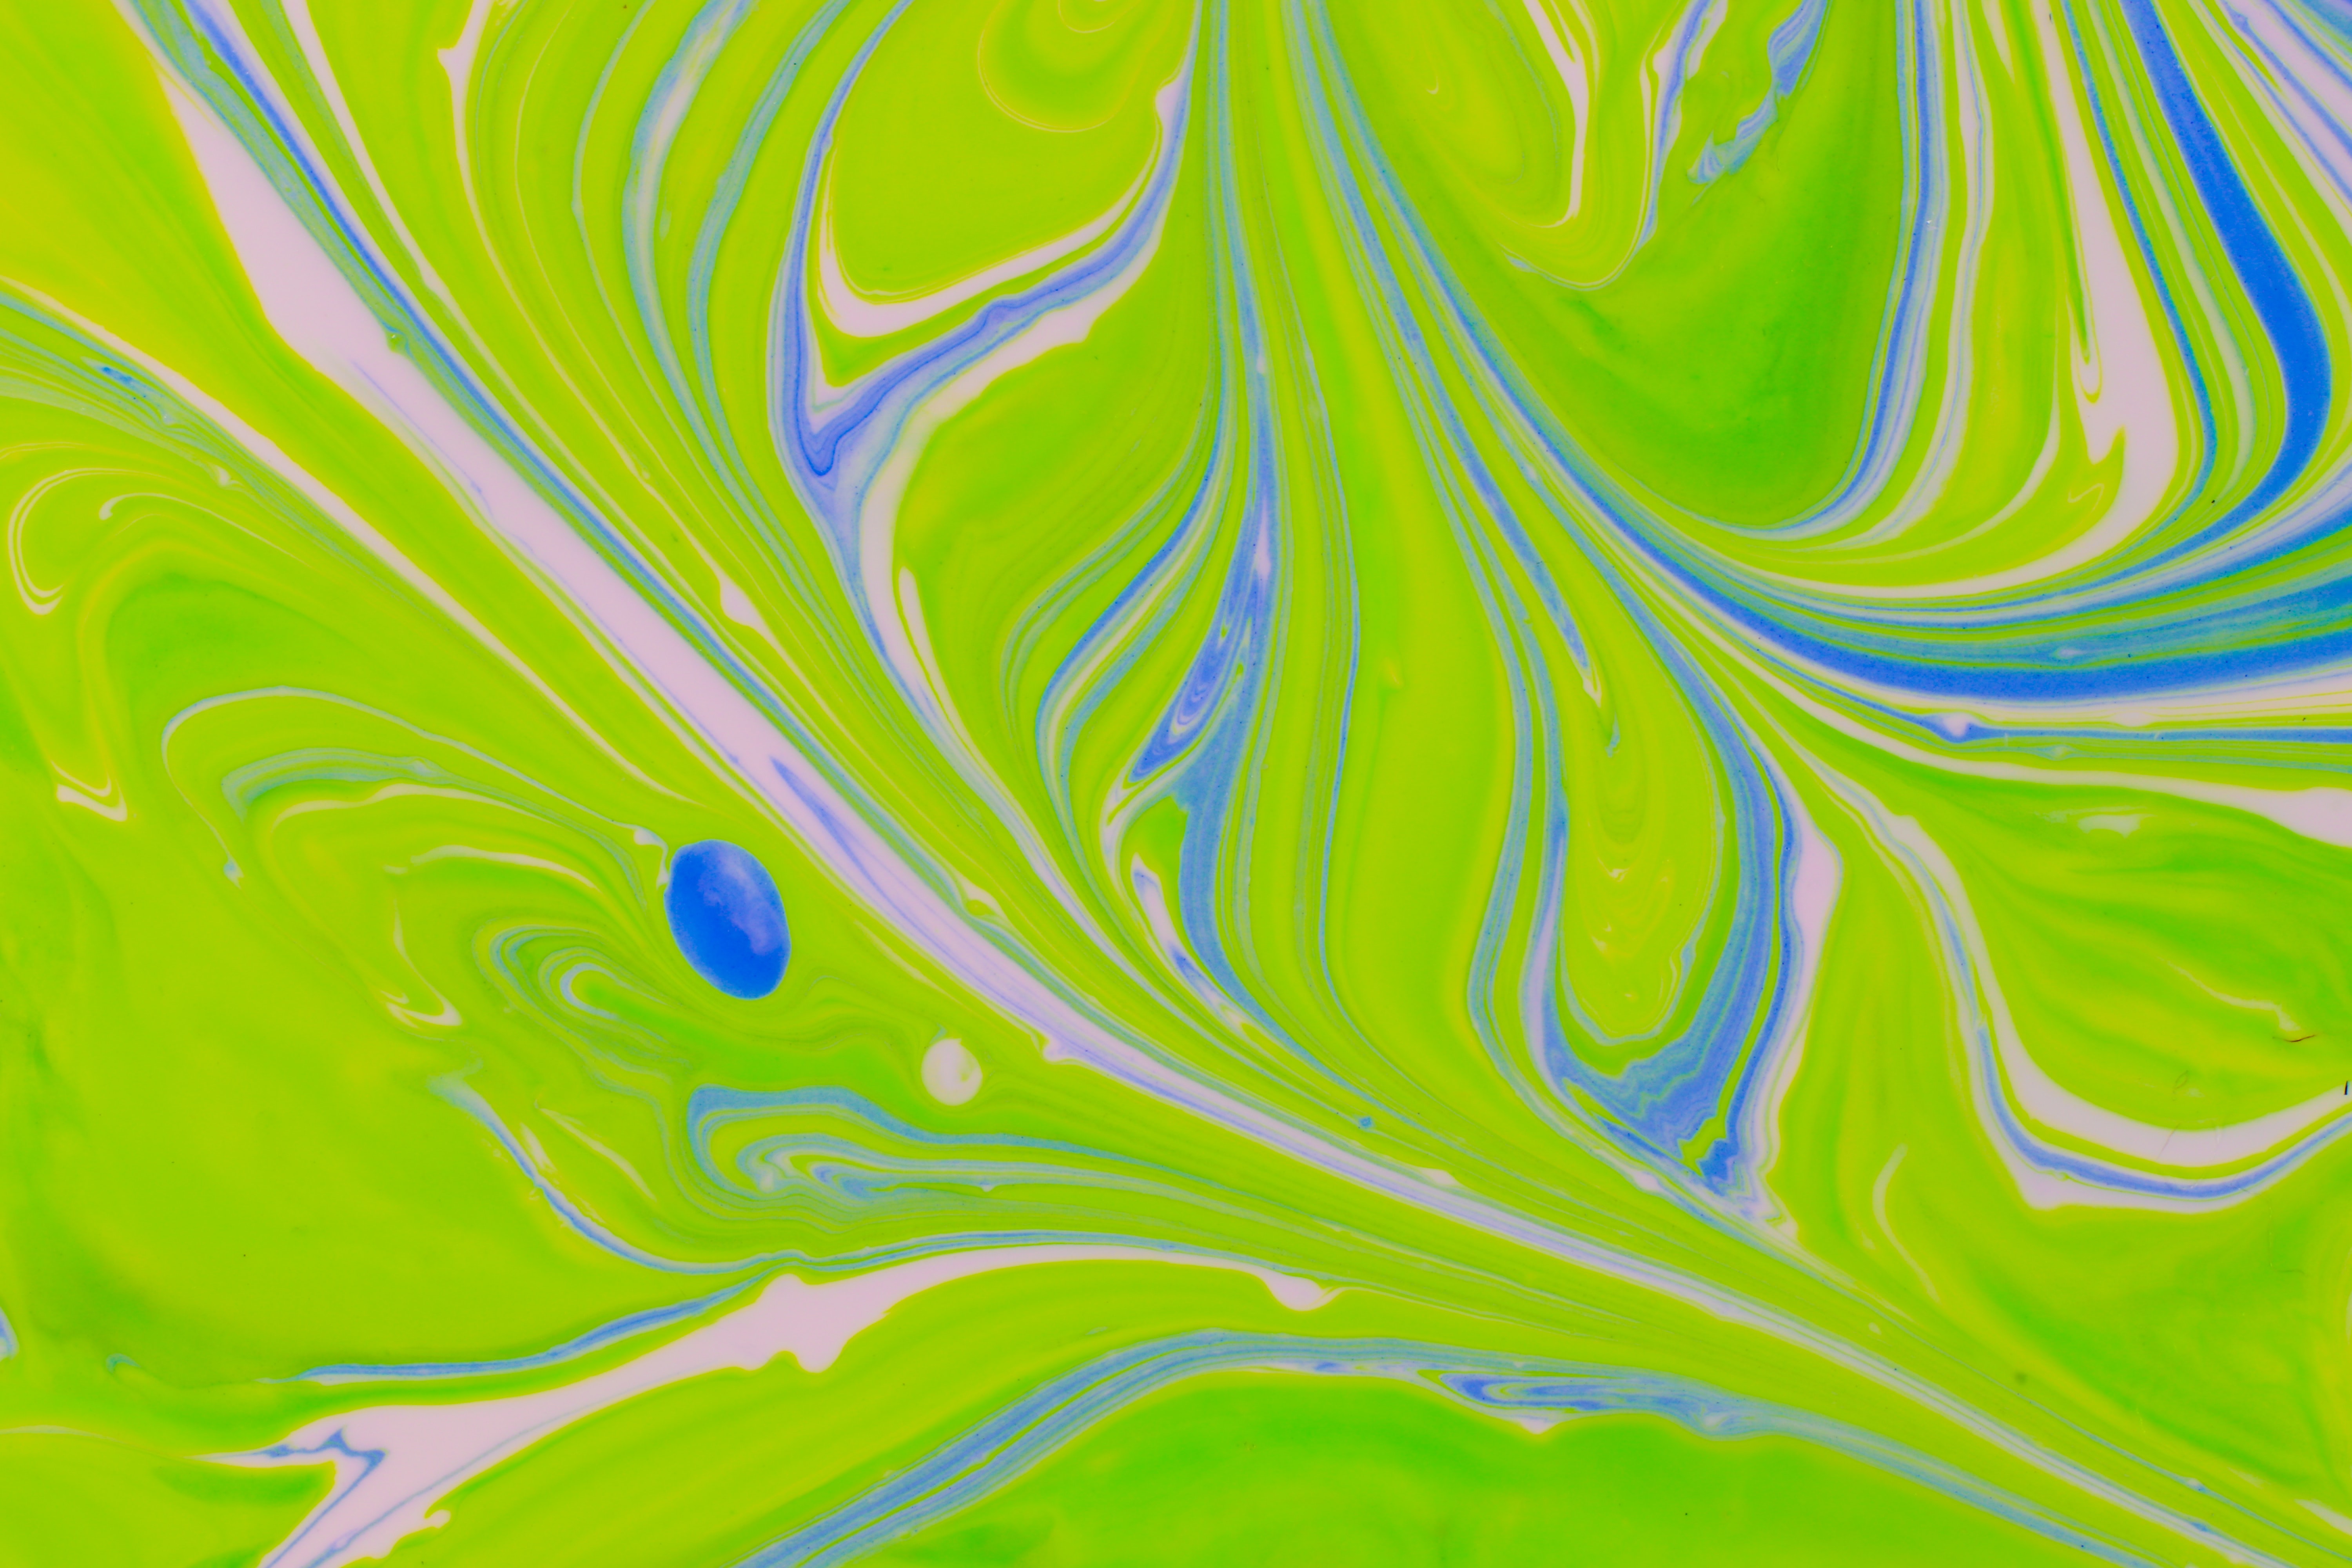 paint, abstract, white, green, blue, divorces, mixing images